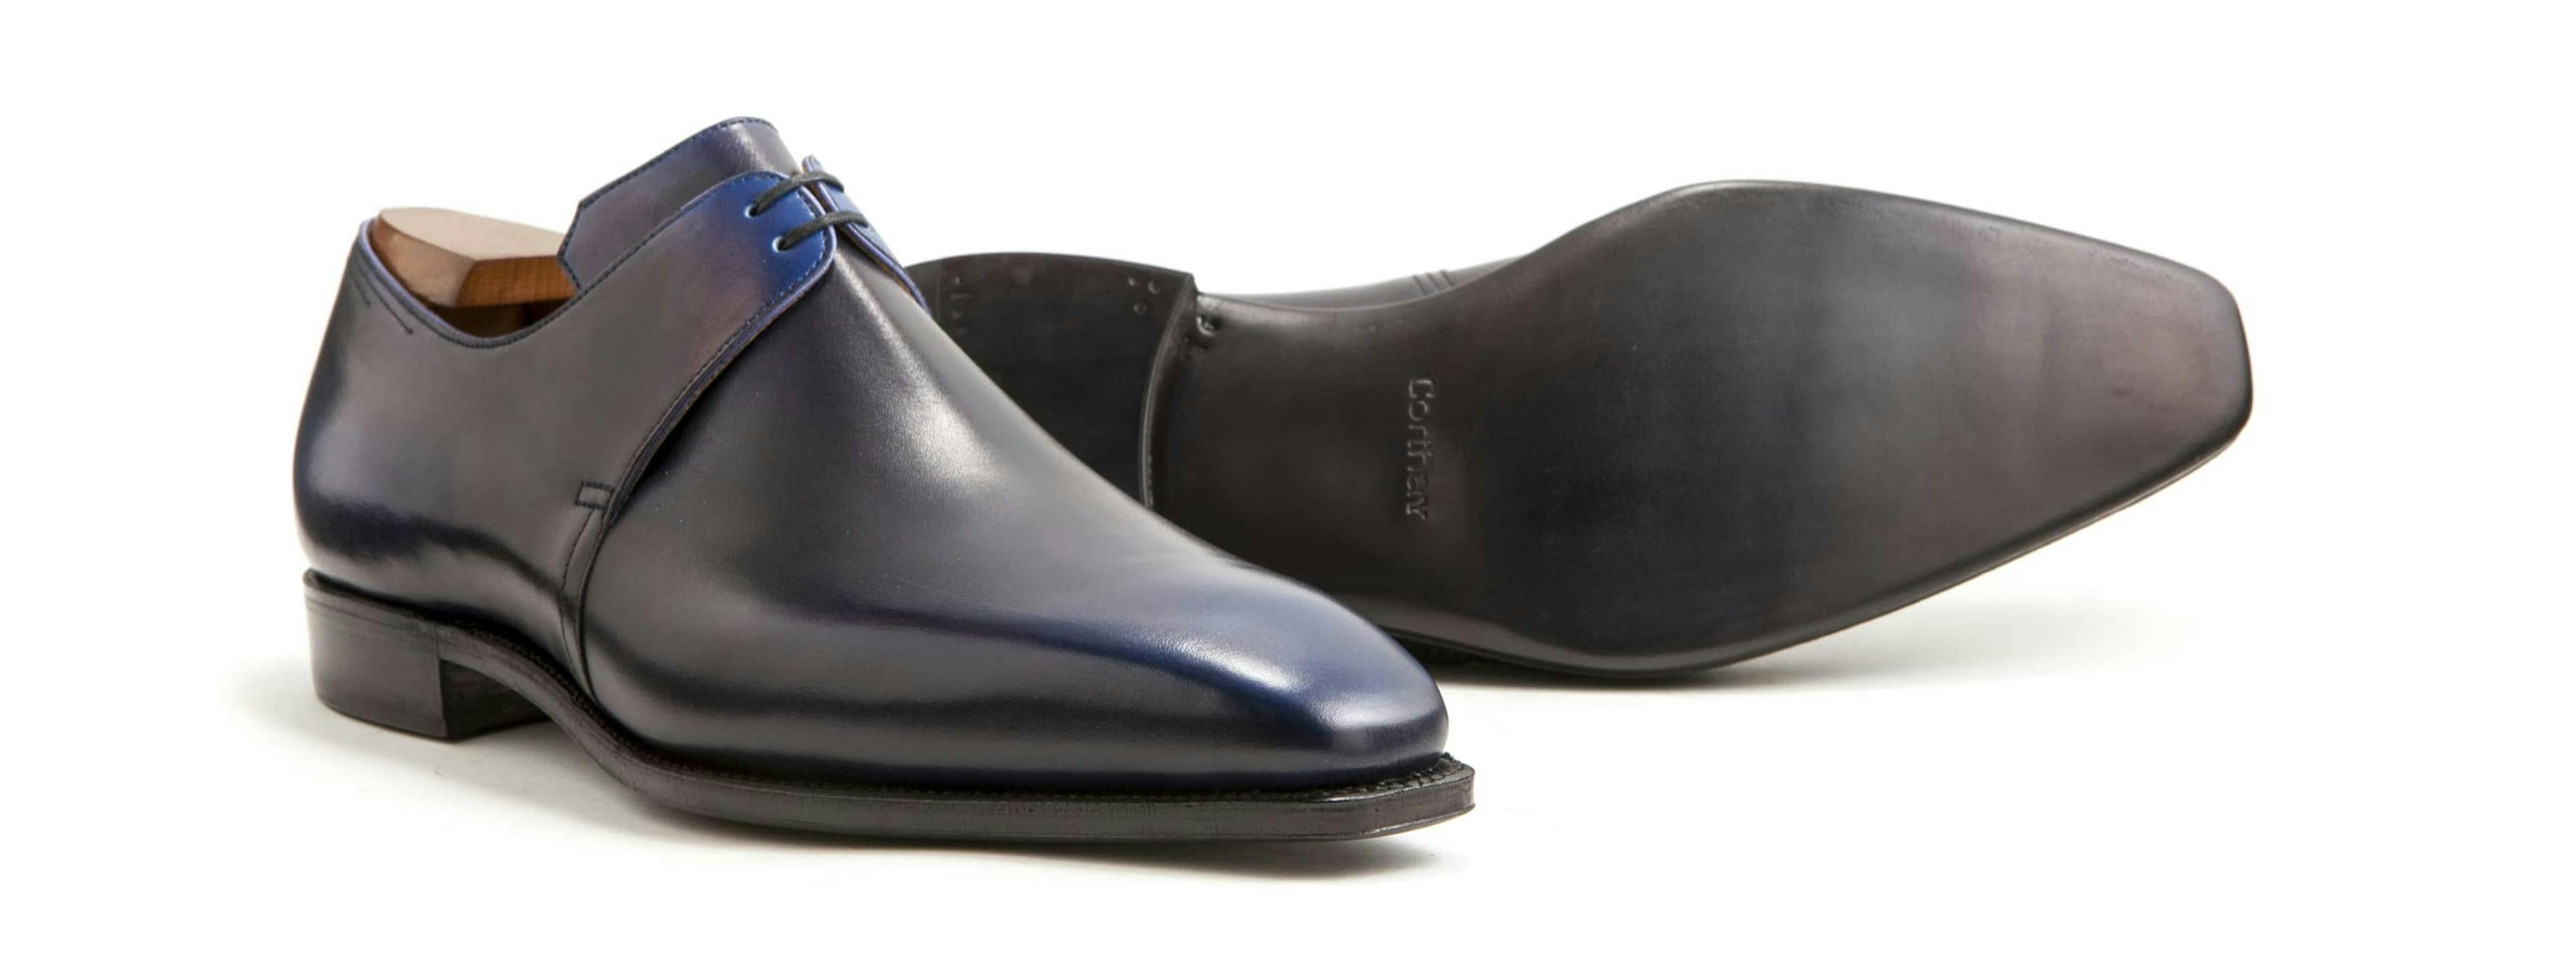 Corthay Arca in blue calfskin, with a view of its leather soles.